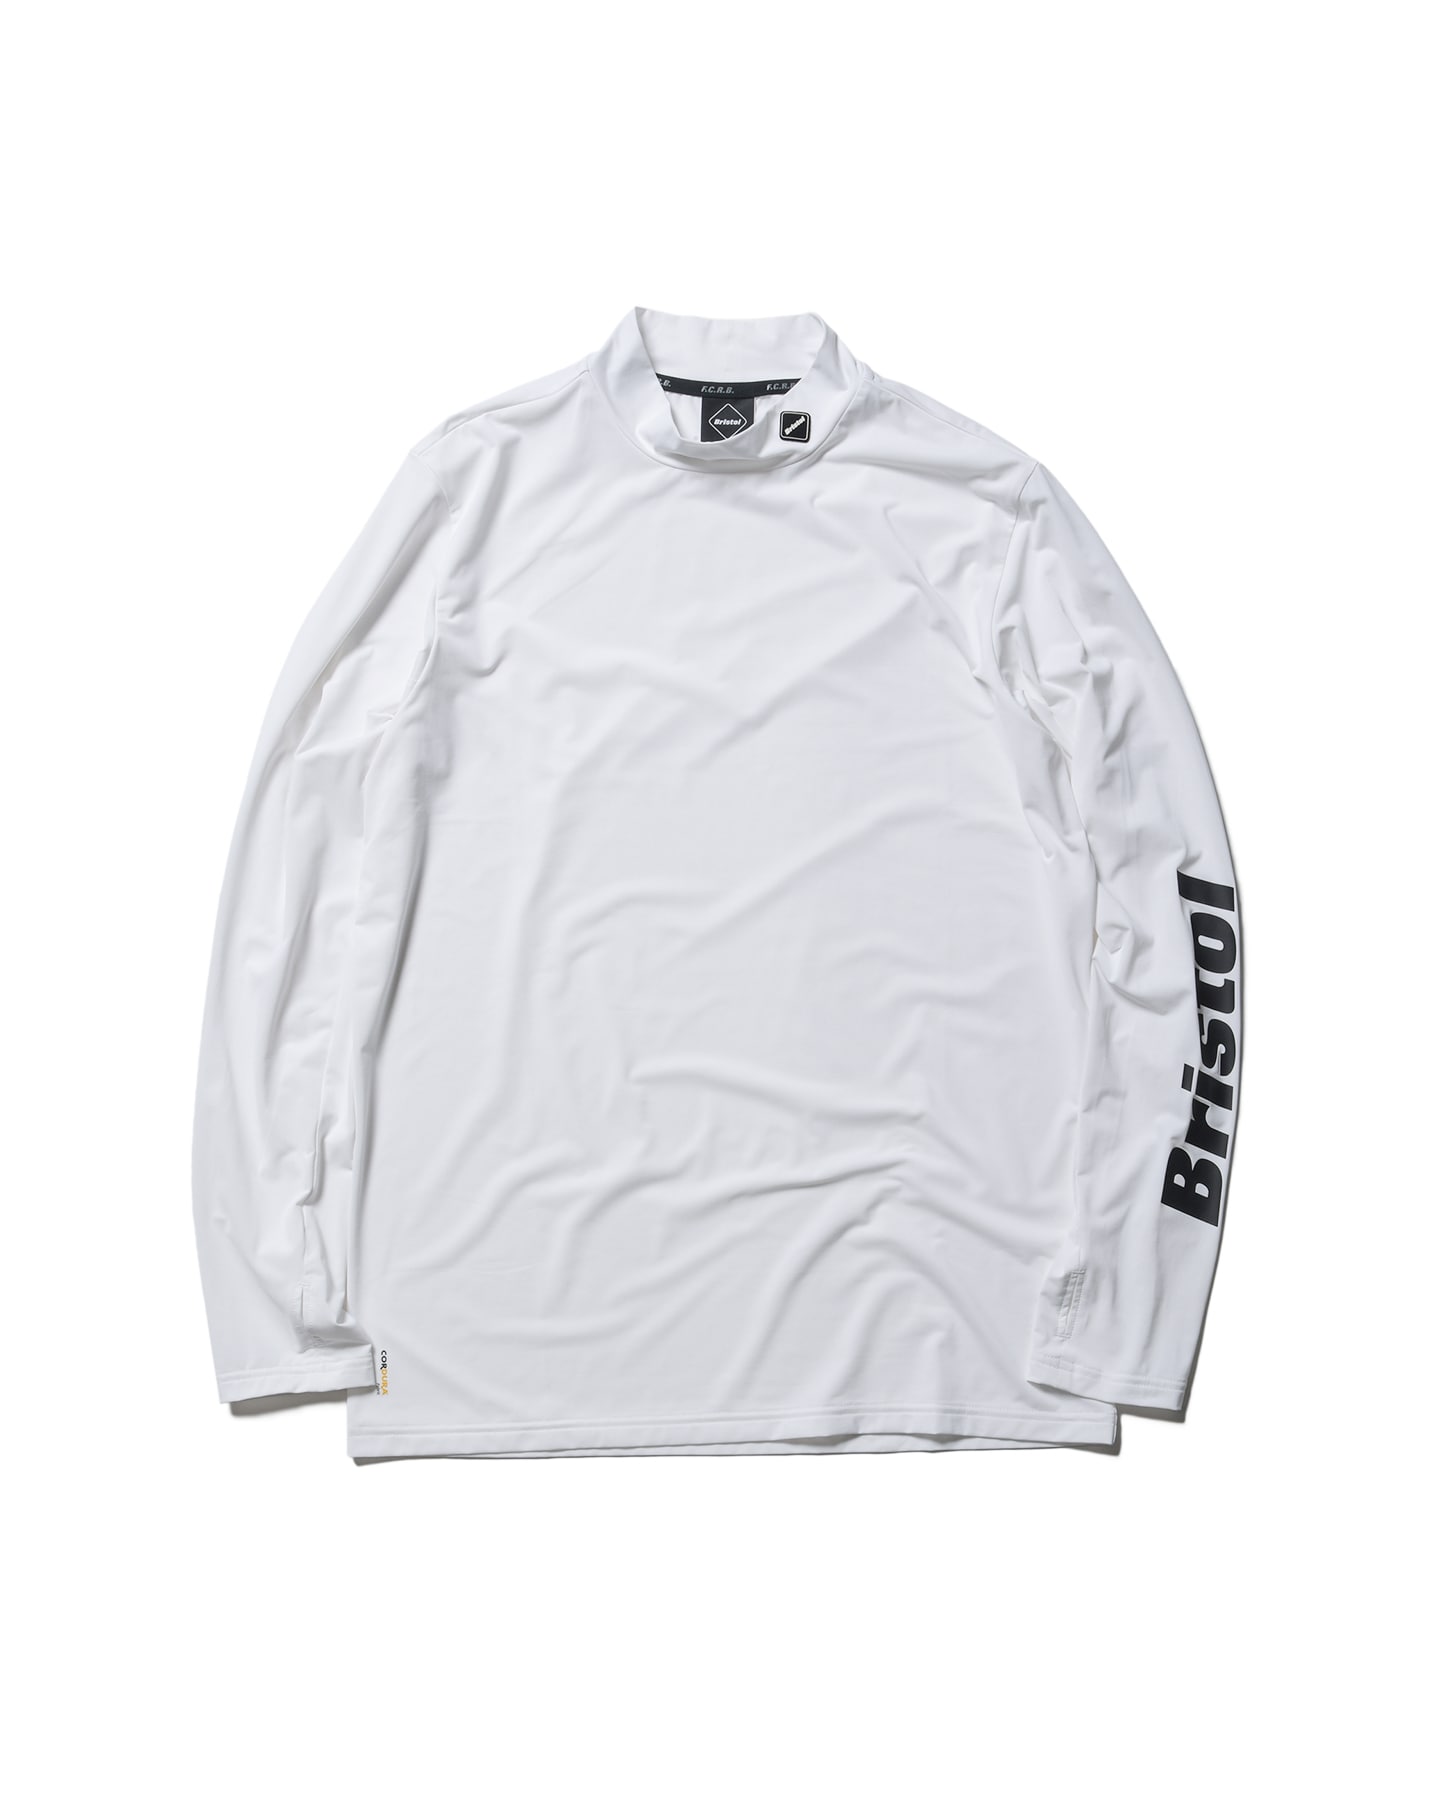 SOPH. | COOL TOUCH L/S MOCKNECK TOP(S WHITE):